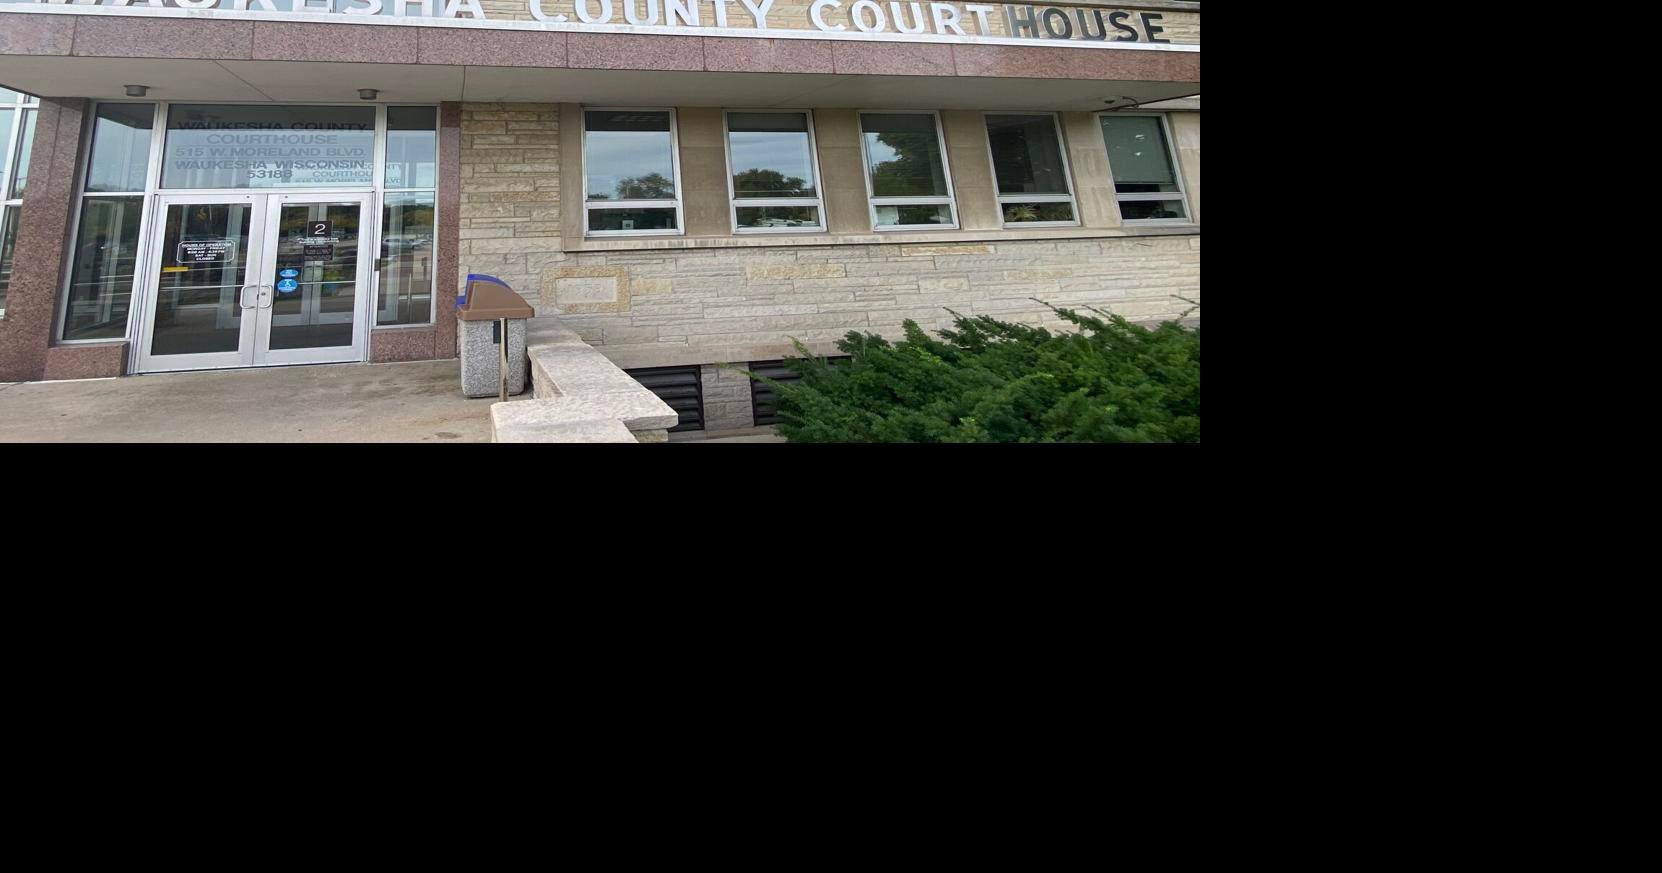 Two charged in Waukesha County Jail inmate death Waukesha Co News